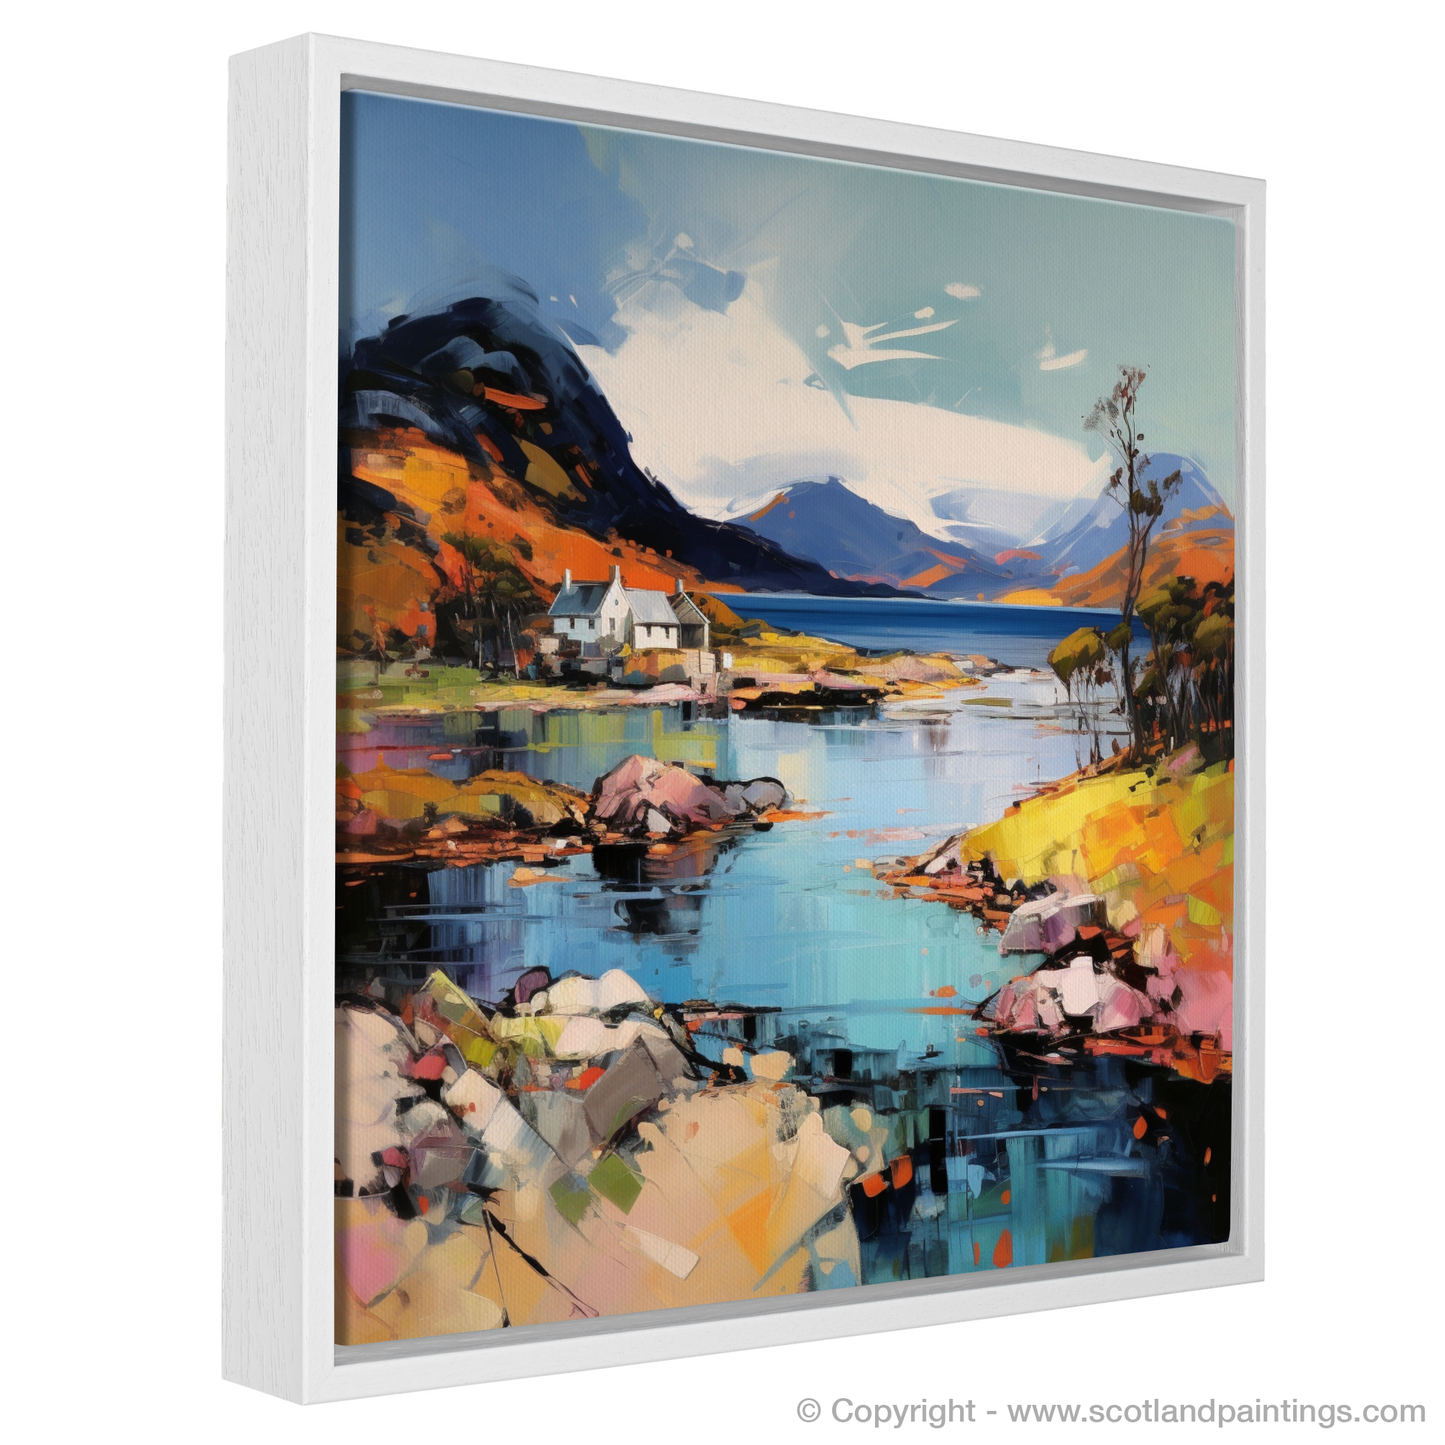 Painting and Art Print of Shieldaig Bay, Wester Ross entitled "Emergence of the Rugged Splendour: An Expressionist Ode to Shieldaig Bay".